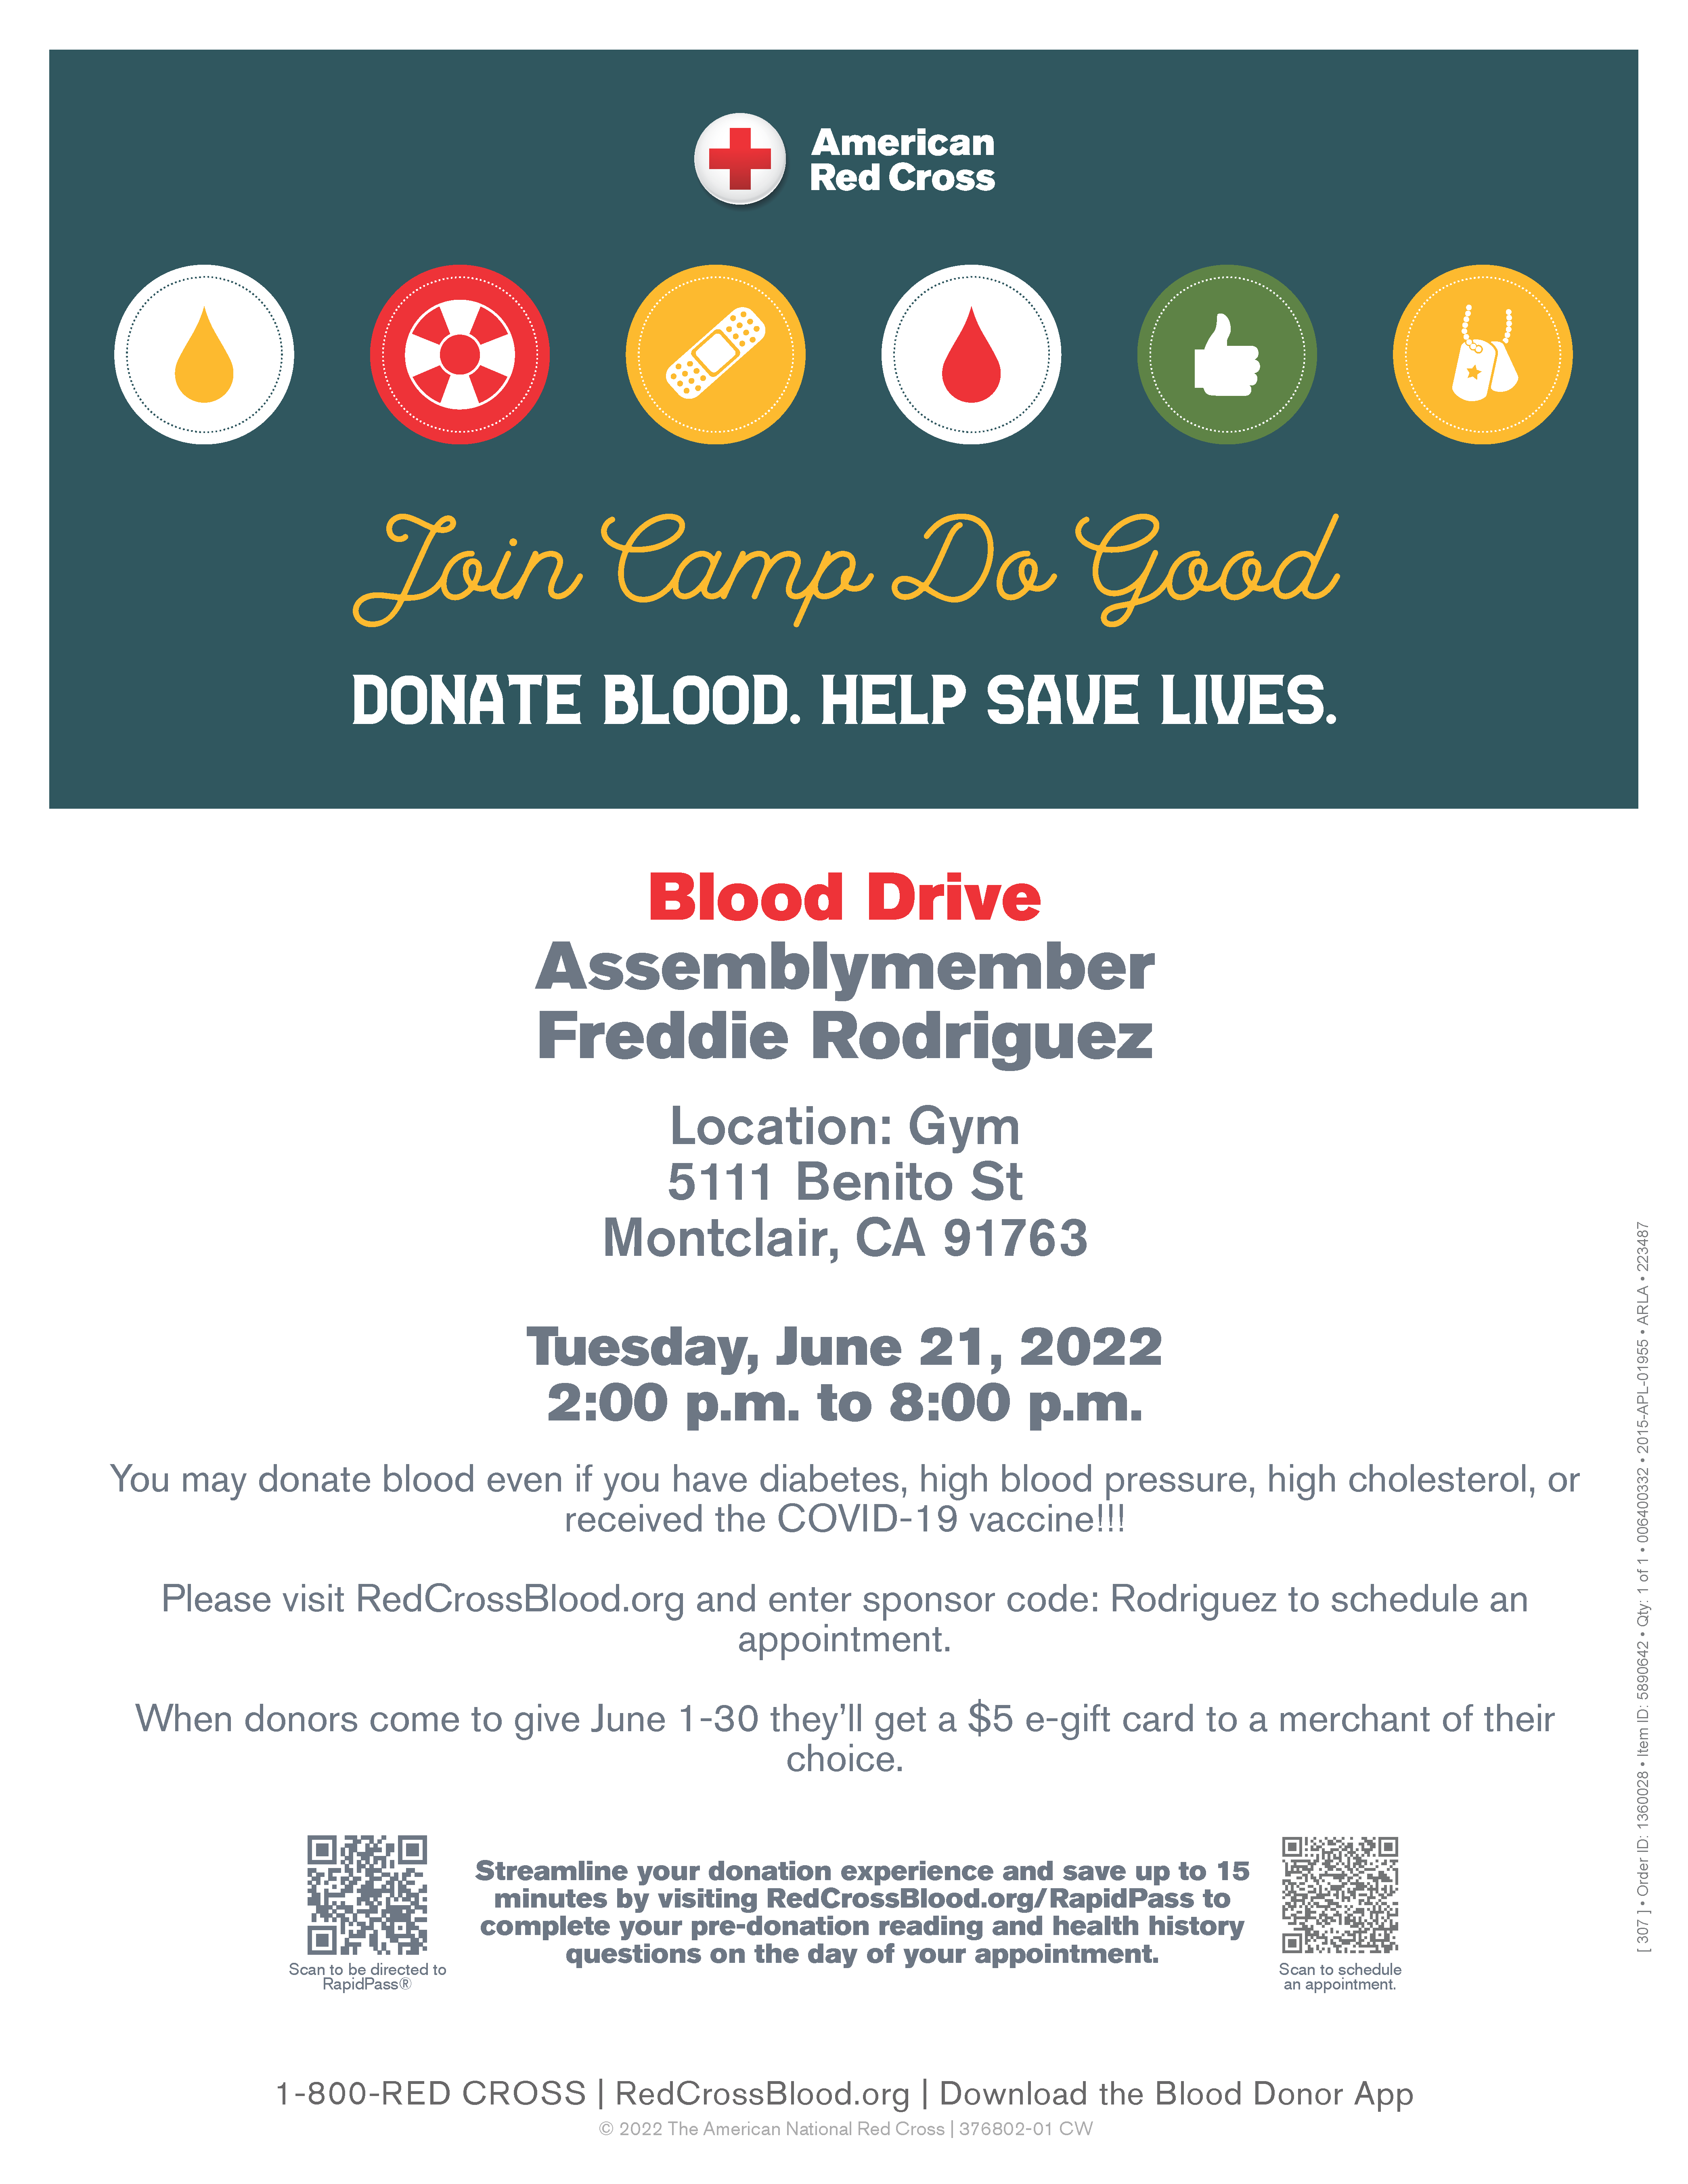 Blood Drive supported by Assemblymember Freddie Rodriguez 